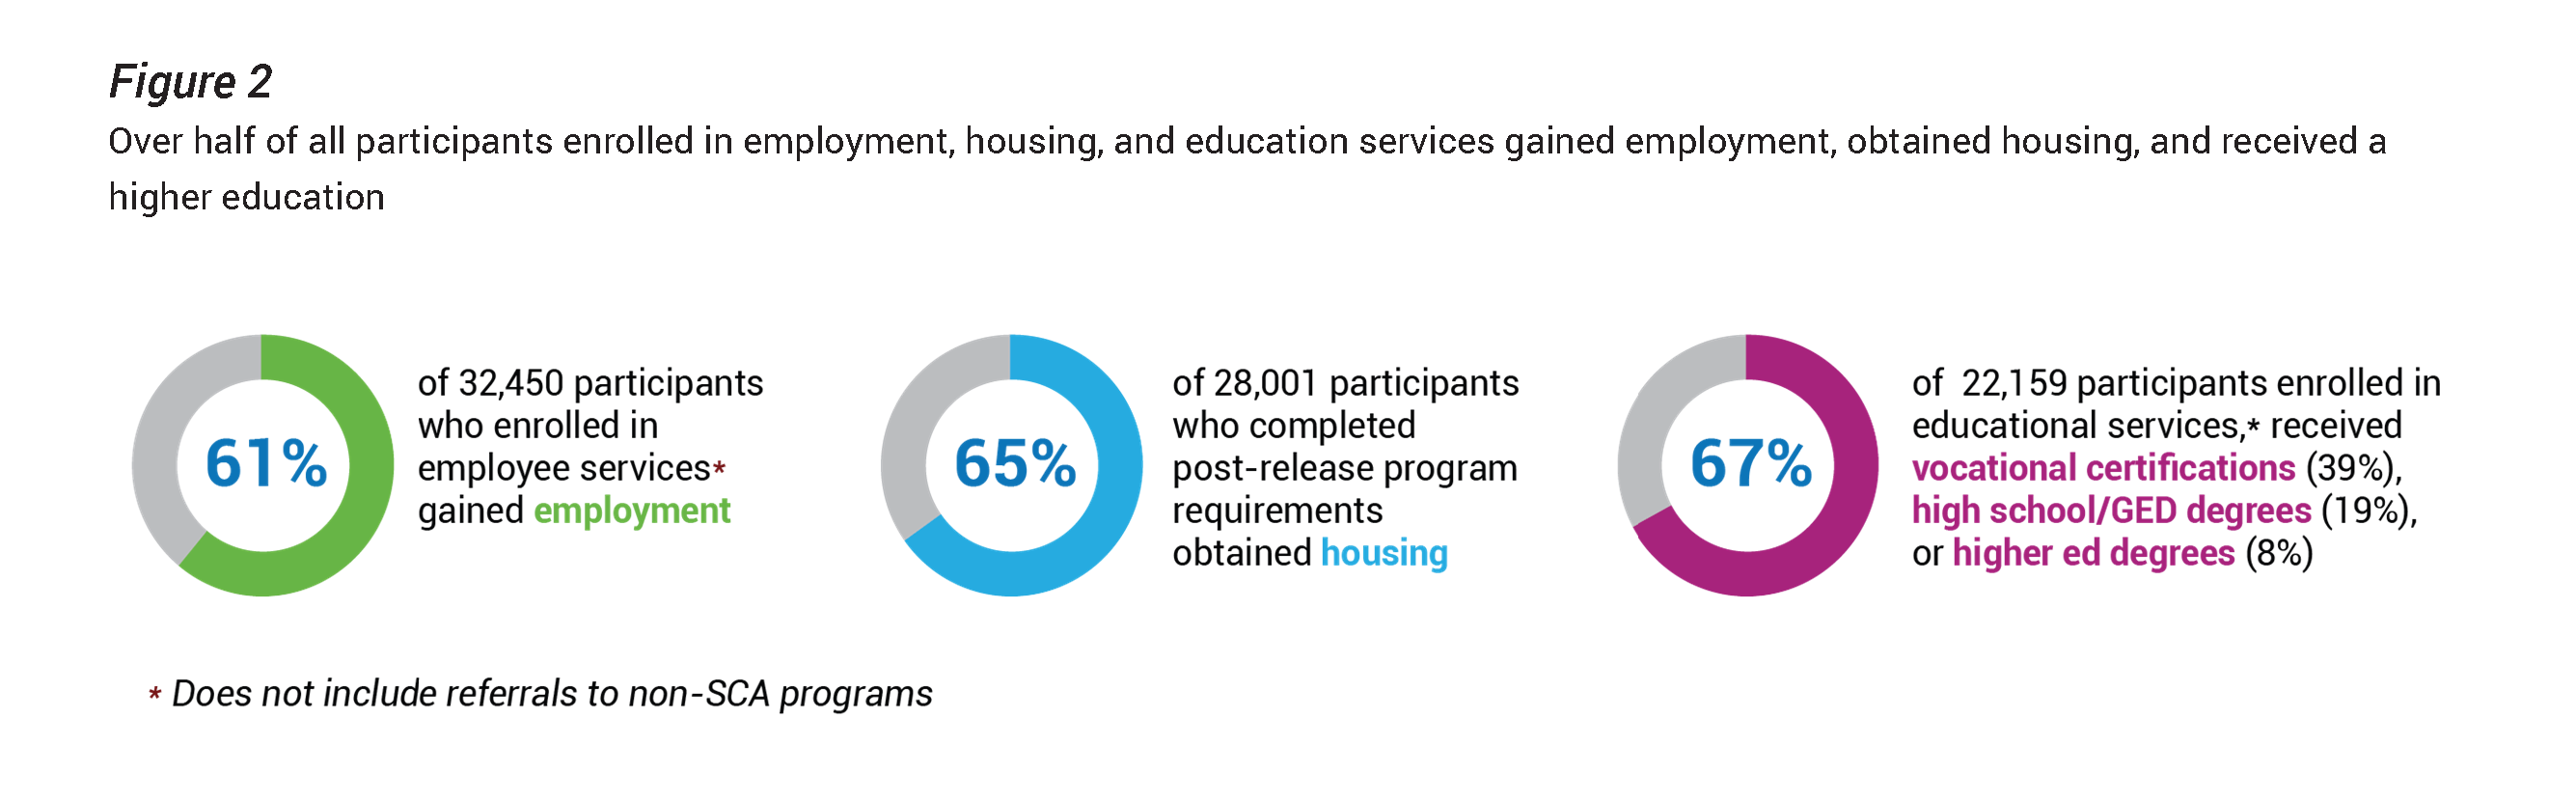 Infographic highlights half of all participants enrolled in Second Chance employment, housing, and education services gained employment, obtained housing or received a higher education